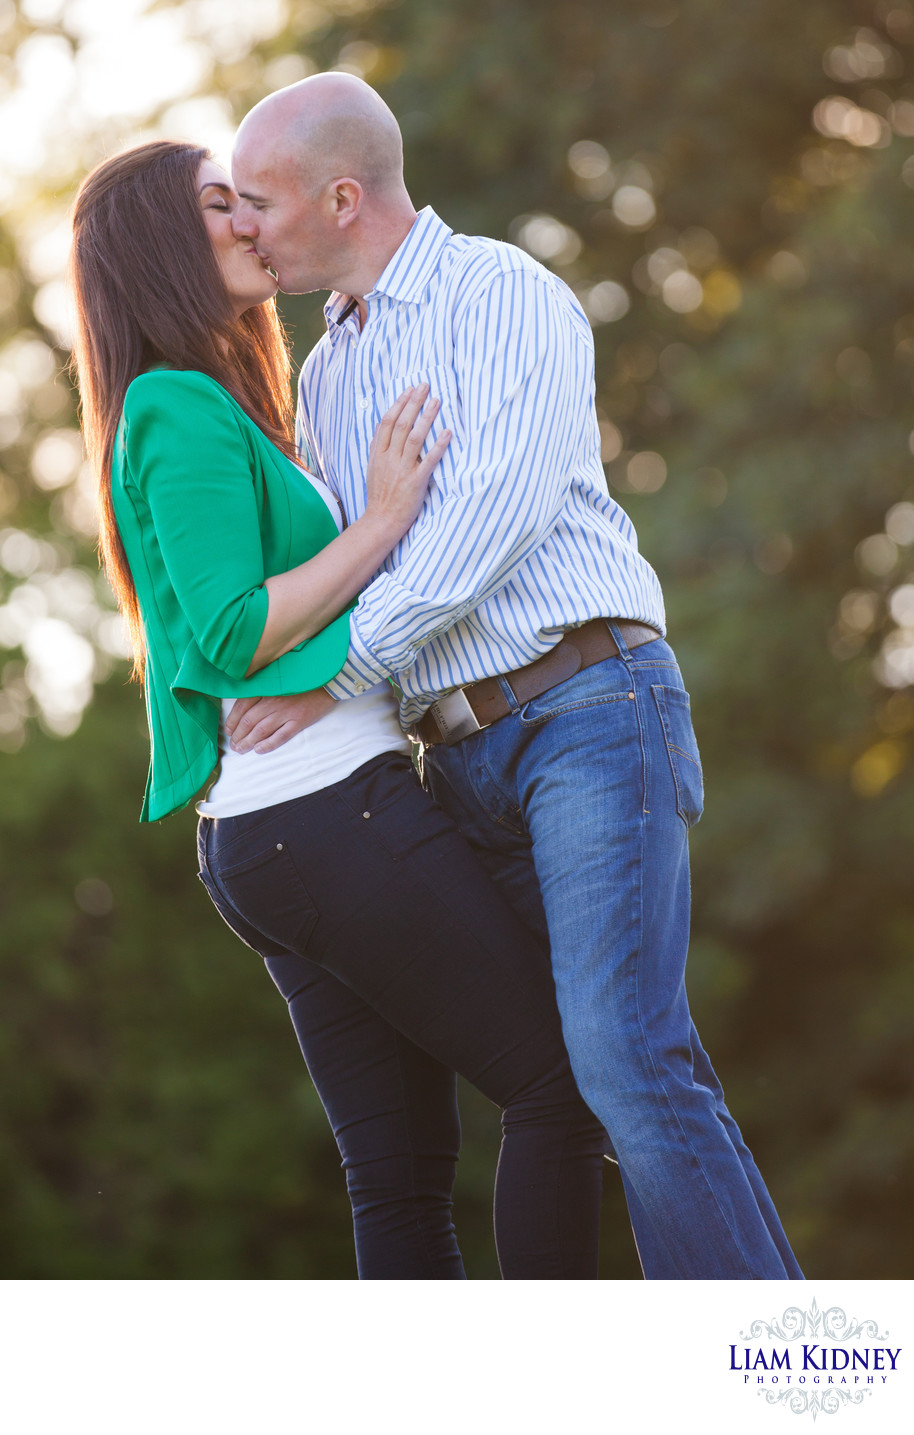 Couple Kissing at Engagement Session in Ireland